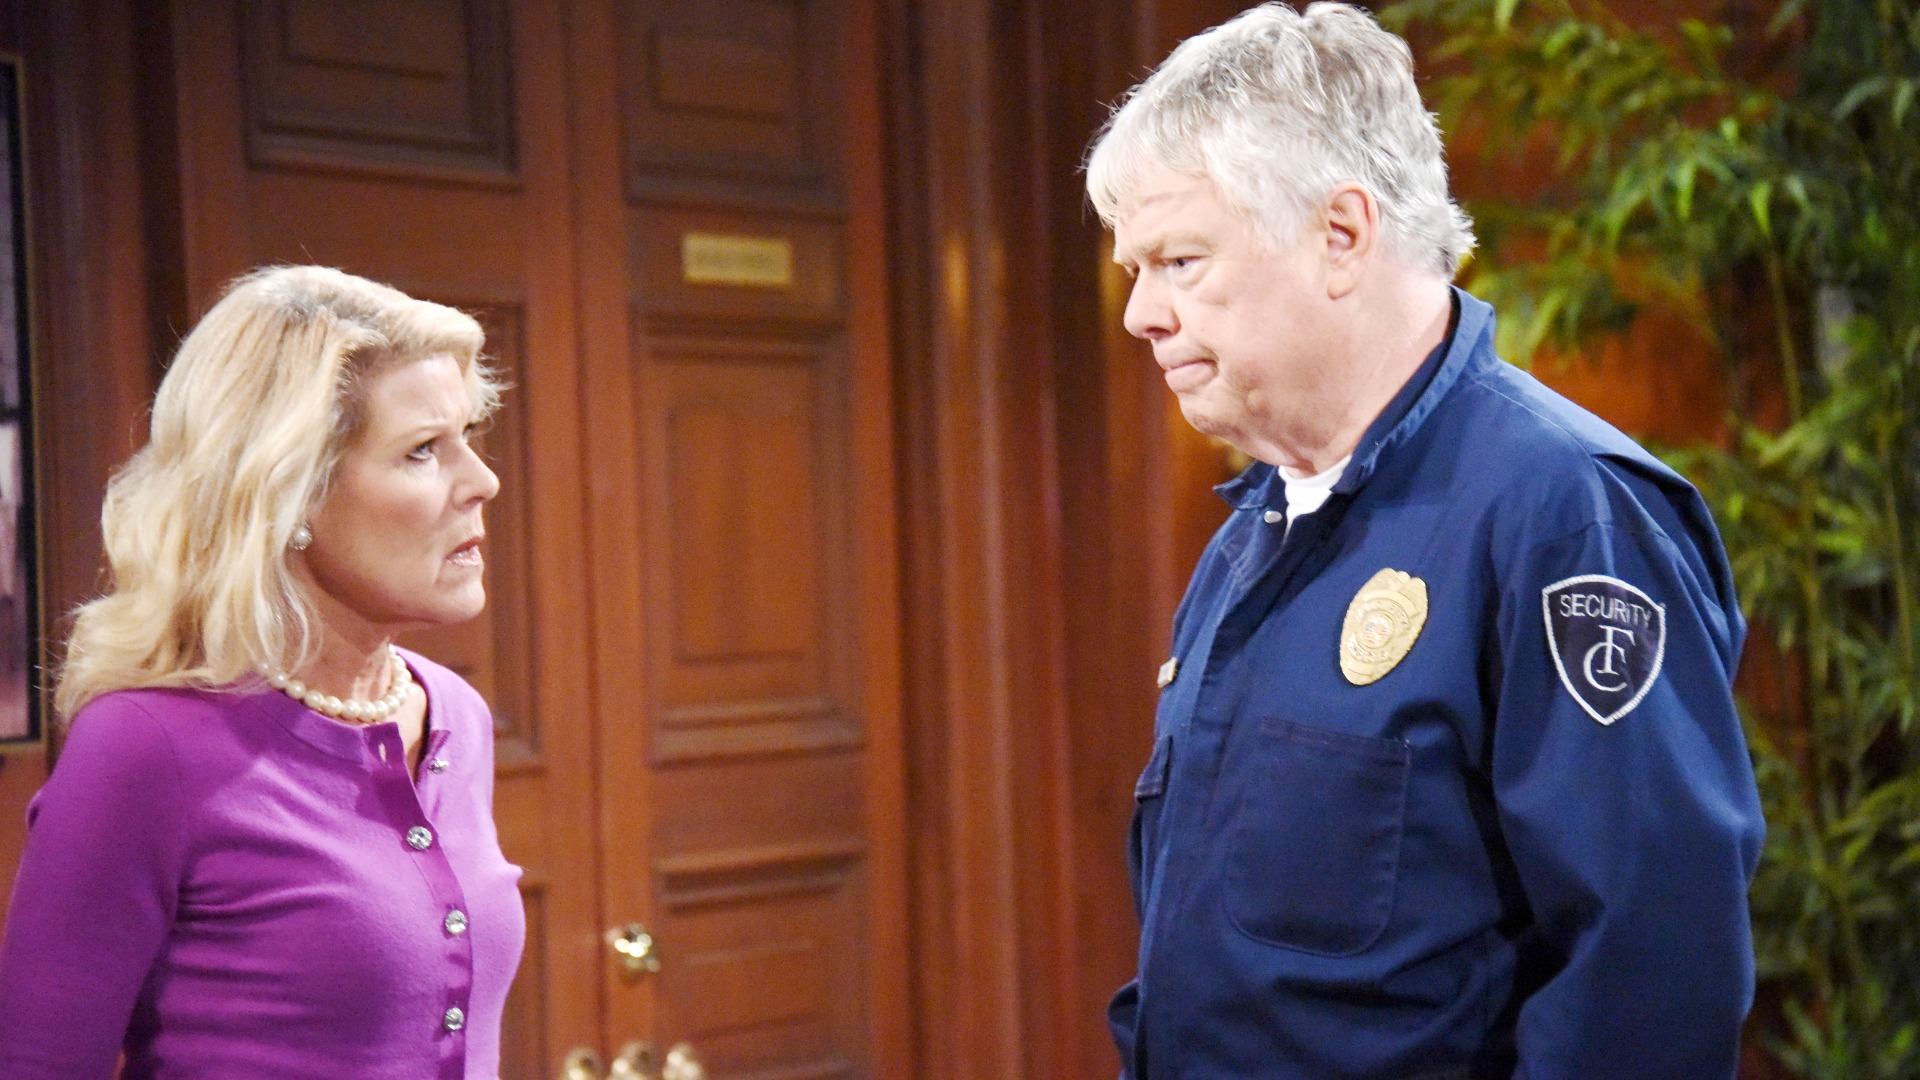 Charlie confesses to Pam about suspicions he has regarding Ridge and Quinn’s loyalty to their significant others.